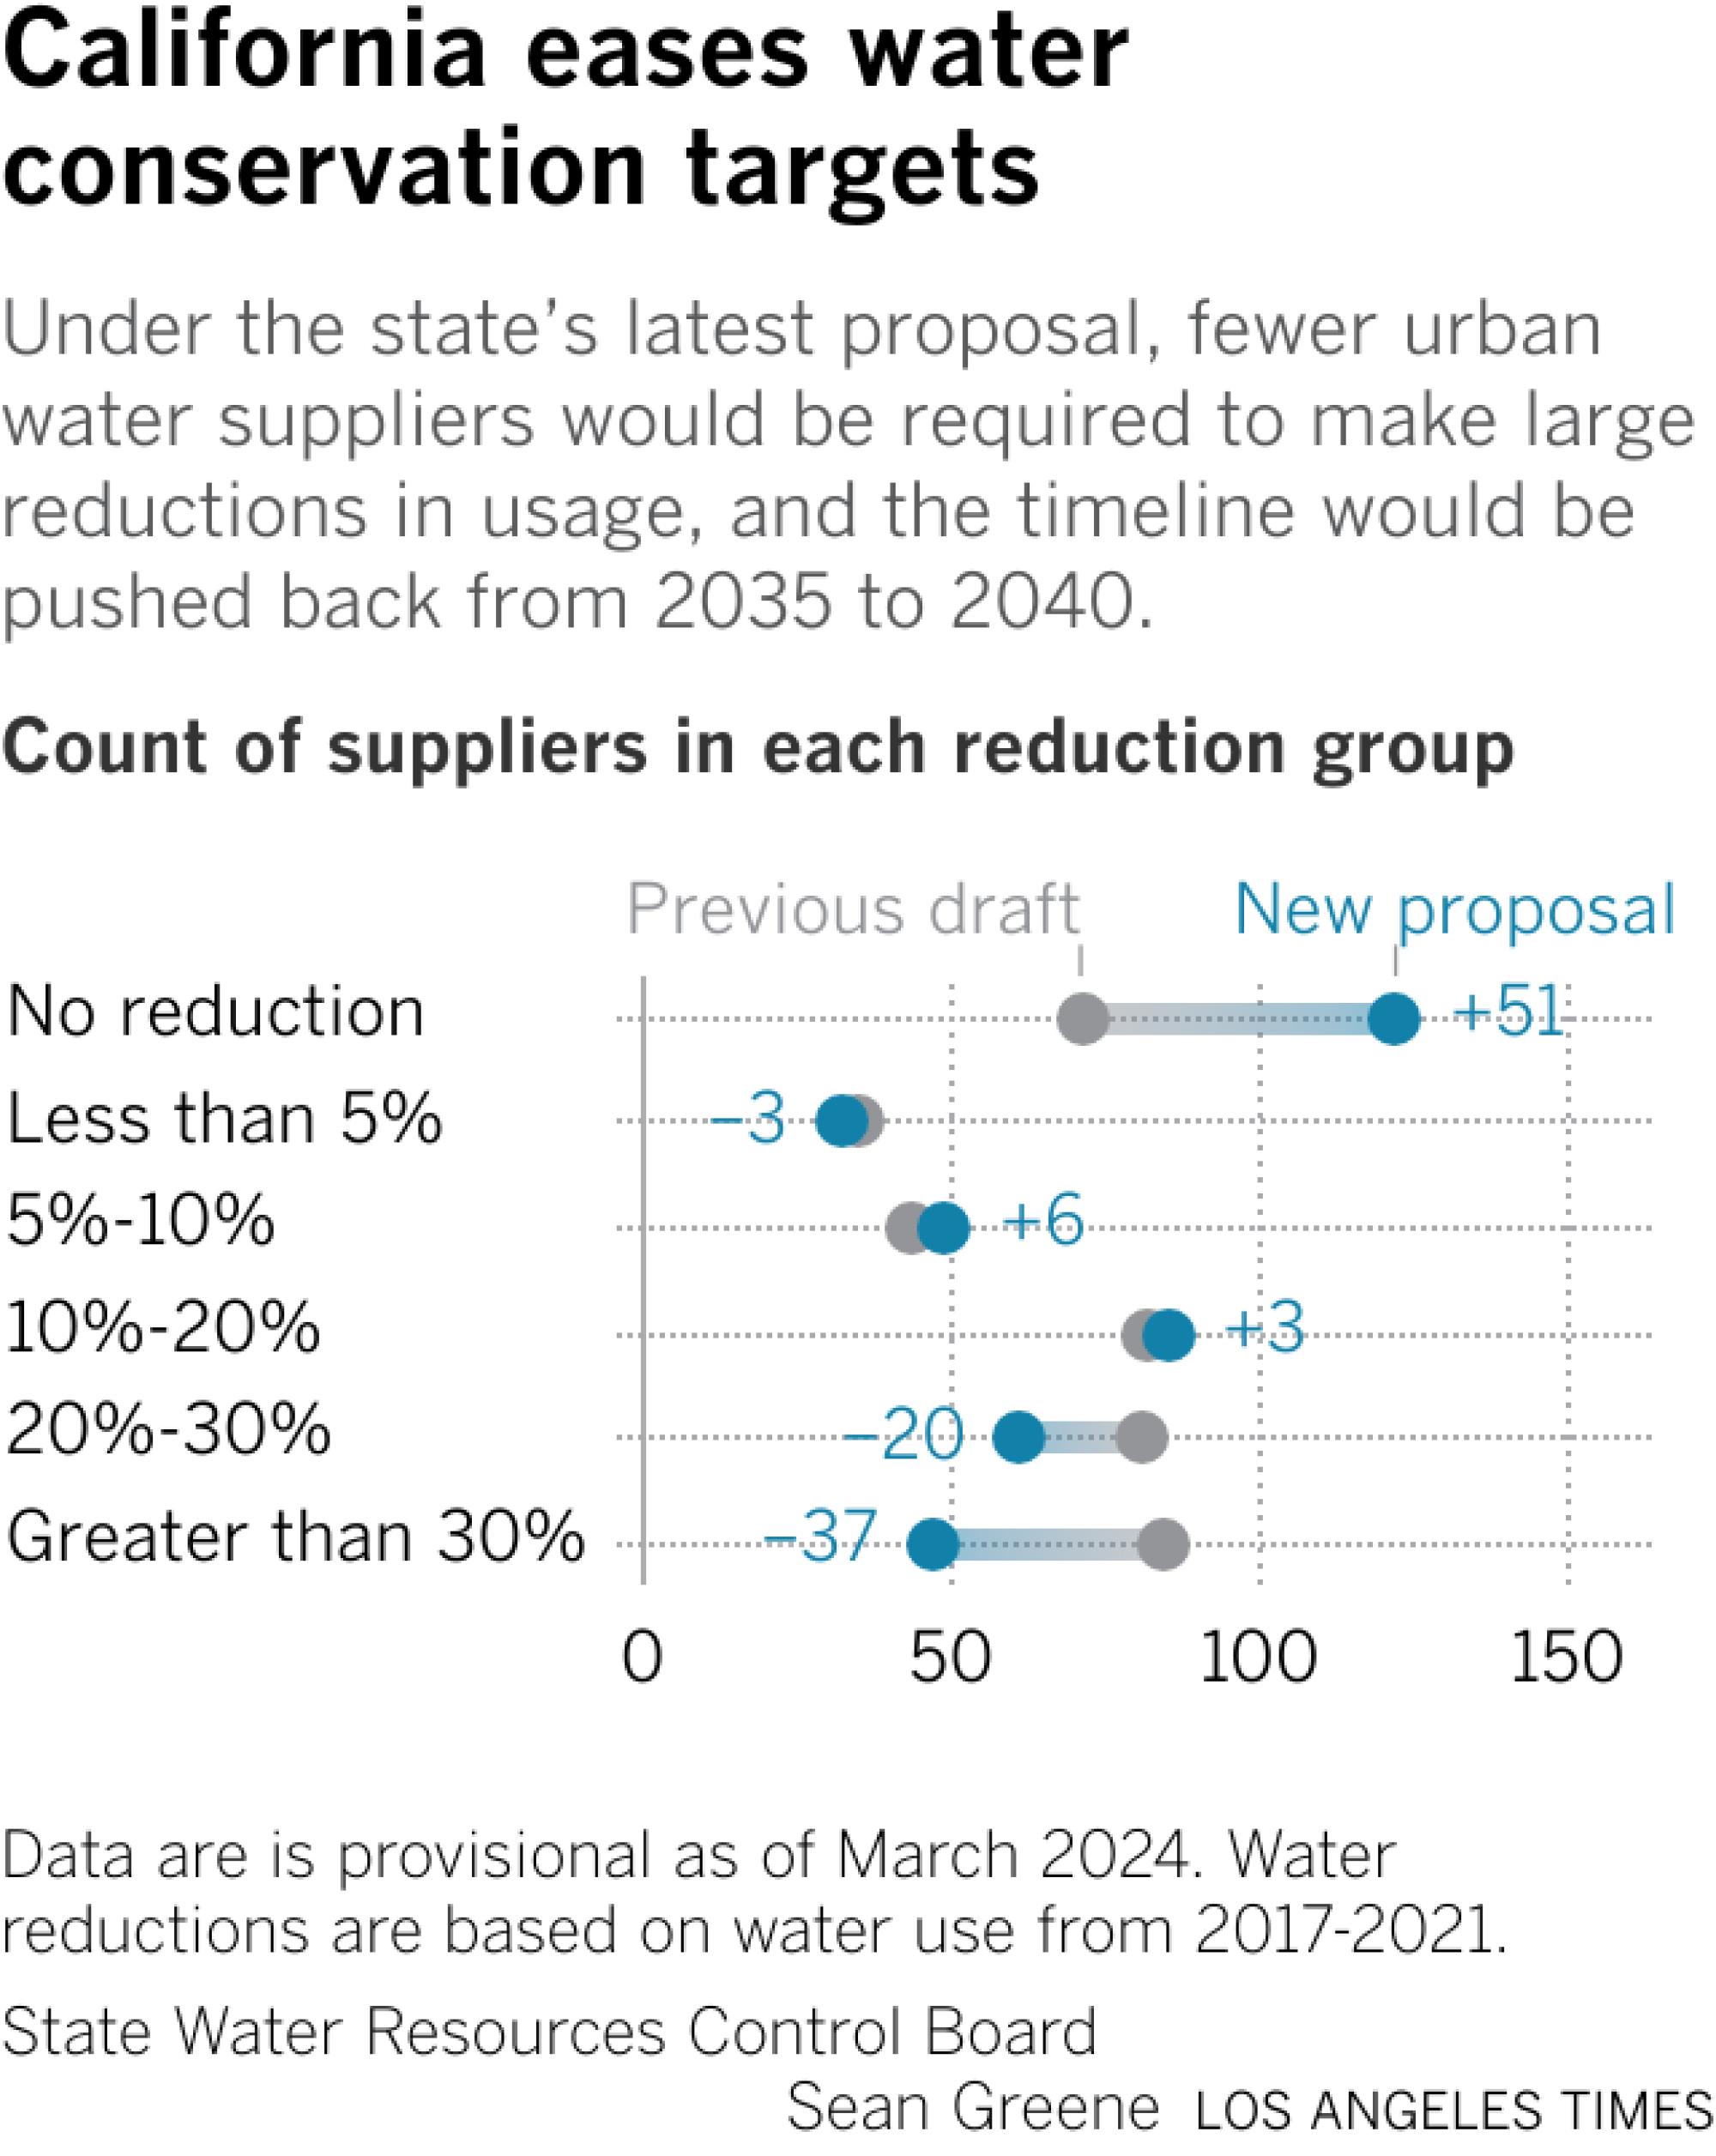 Plot shows the differences between the new and previous water conservation plans. 51 water suppliers are no longer required to make any water use cuts. 37 suppliers saw their required cuts reduced from greater than 30% to a lower amount.